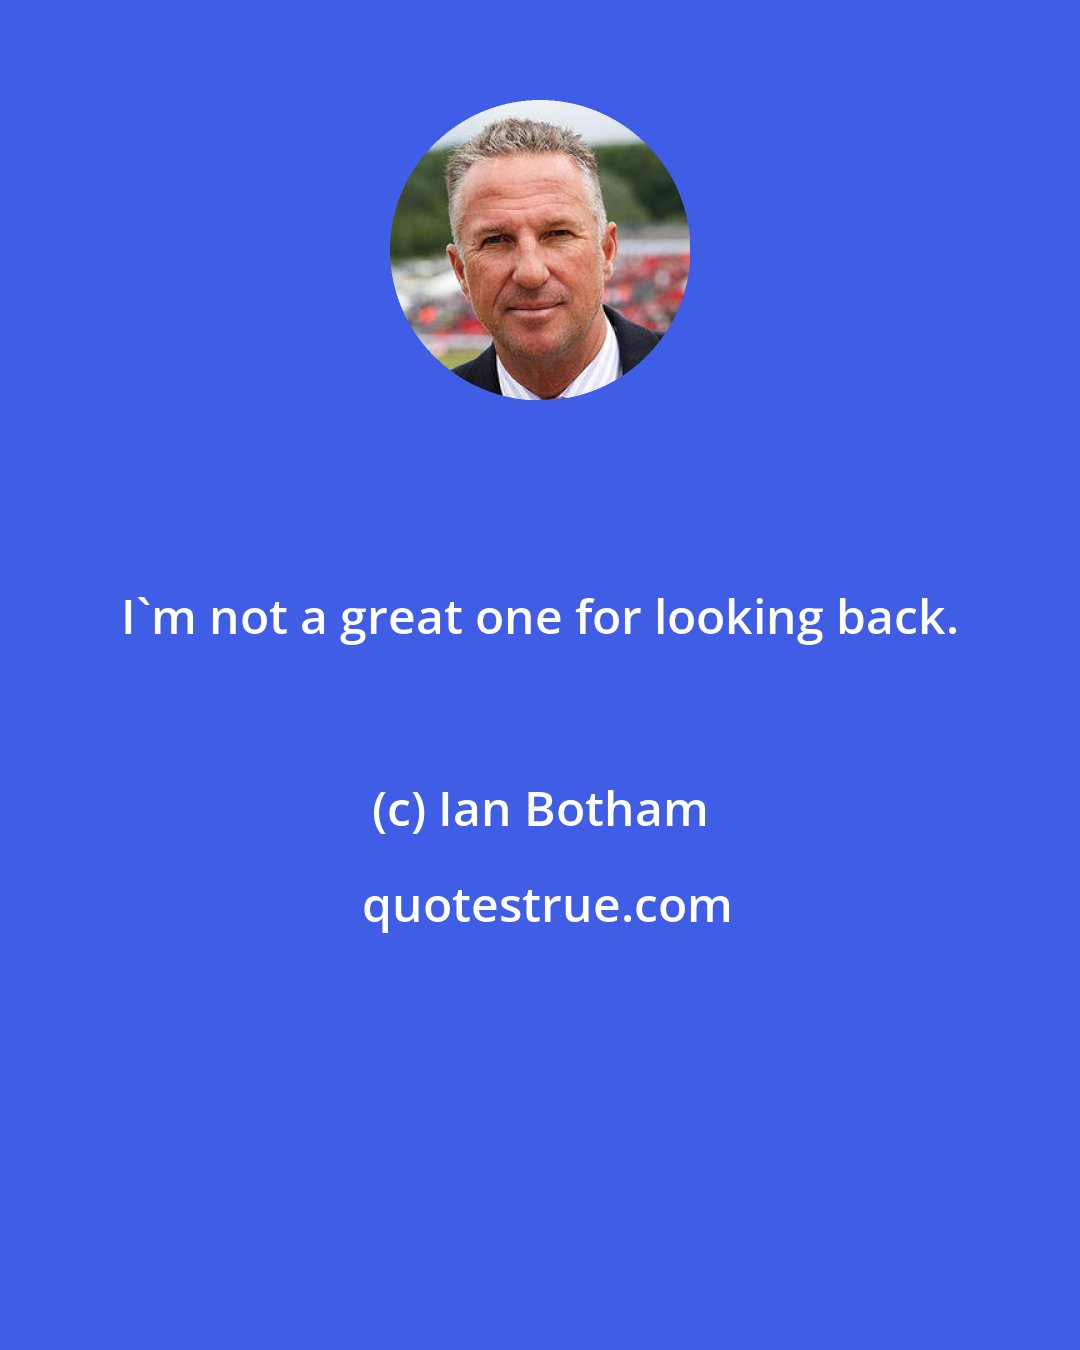 Ian Botham: I'm not a great one for looking back.